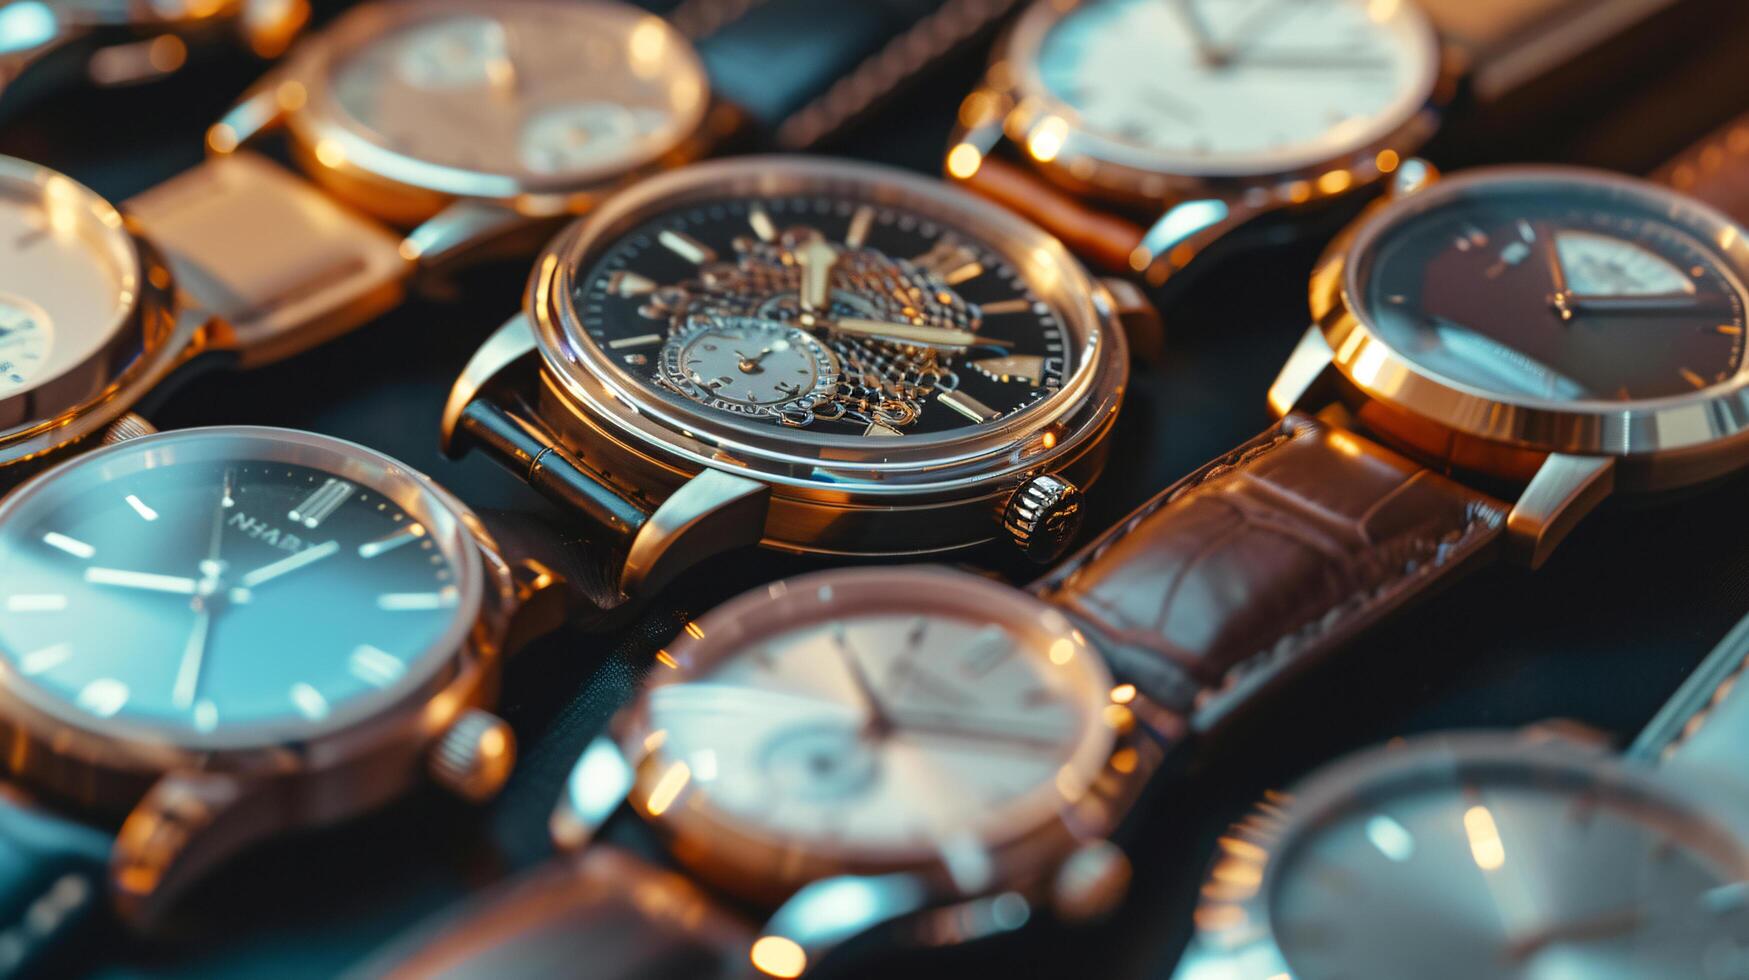 A collection of stylish wristwatches, arranged in a pattern, showcases the elegance of timepieces photo